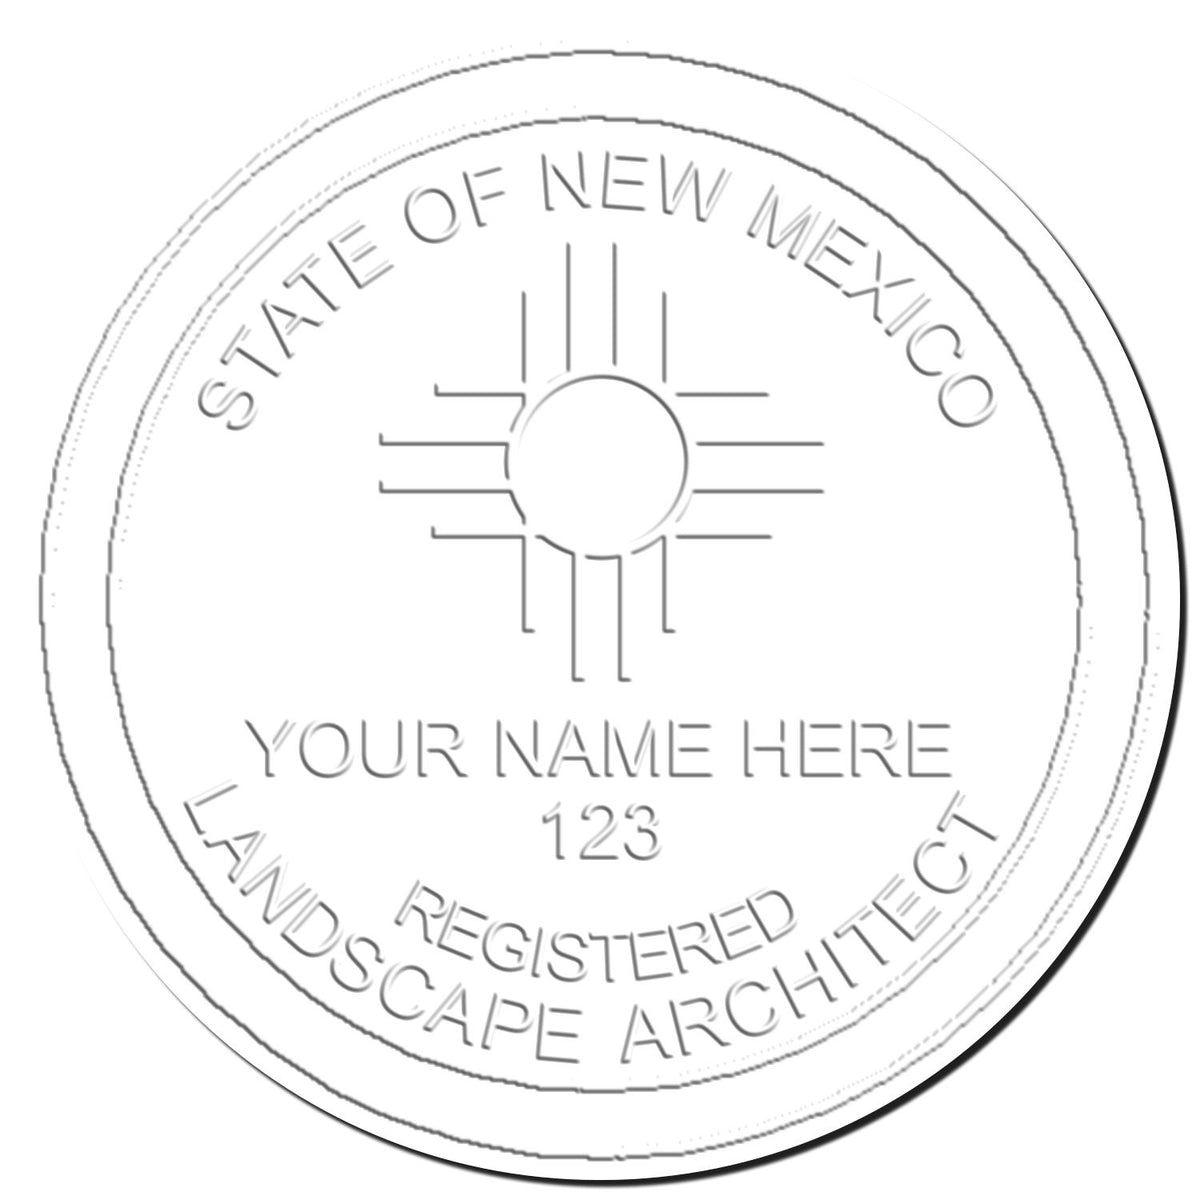 This paper is stamped with a sample imprint of the Hybrid New Mexico Landscape Architect Seal, signifying its quality and reliability.